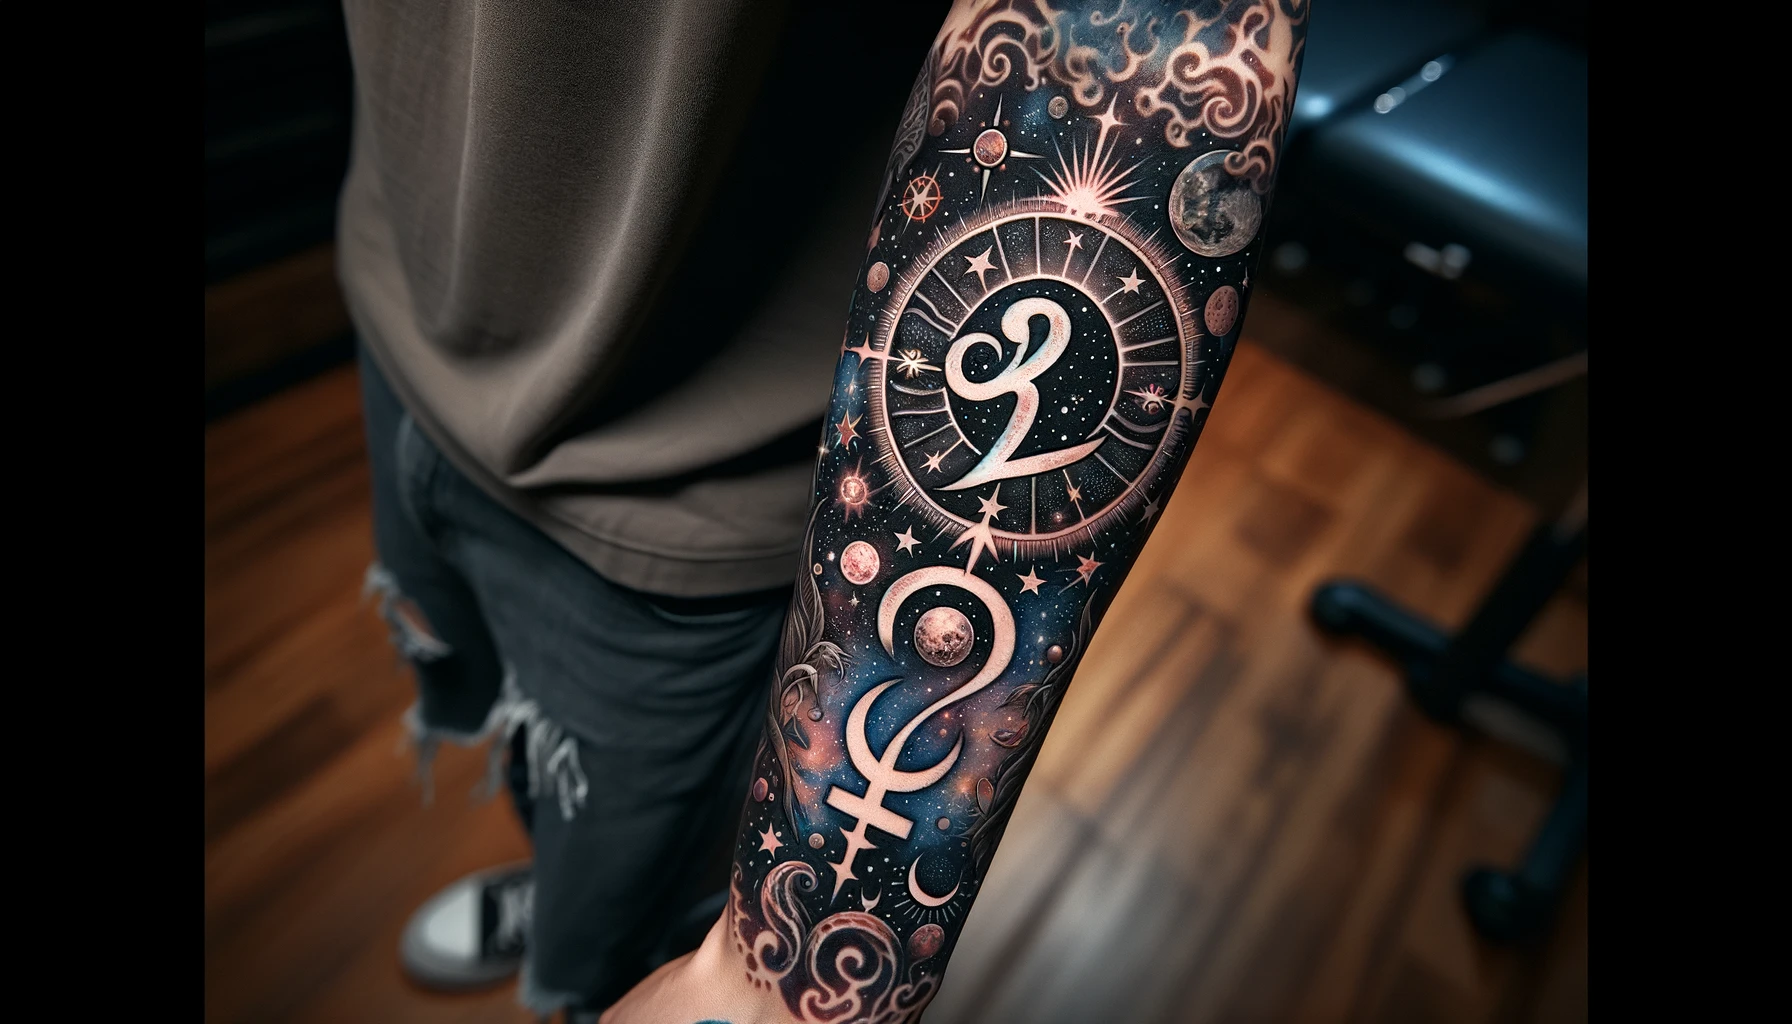 Are certain tattoos considered lucky or auspicious for specific zodiac signs, such as Aquarius